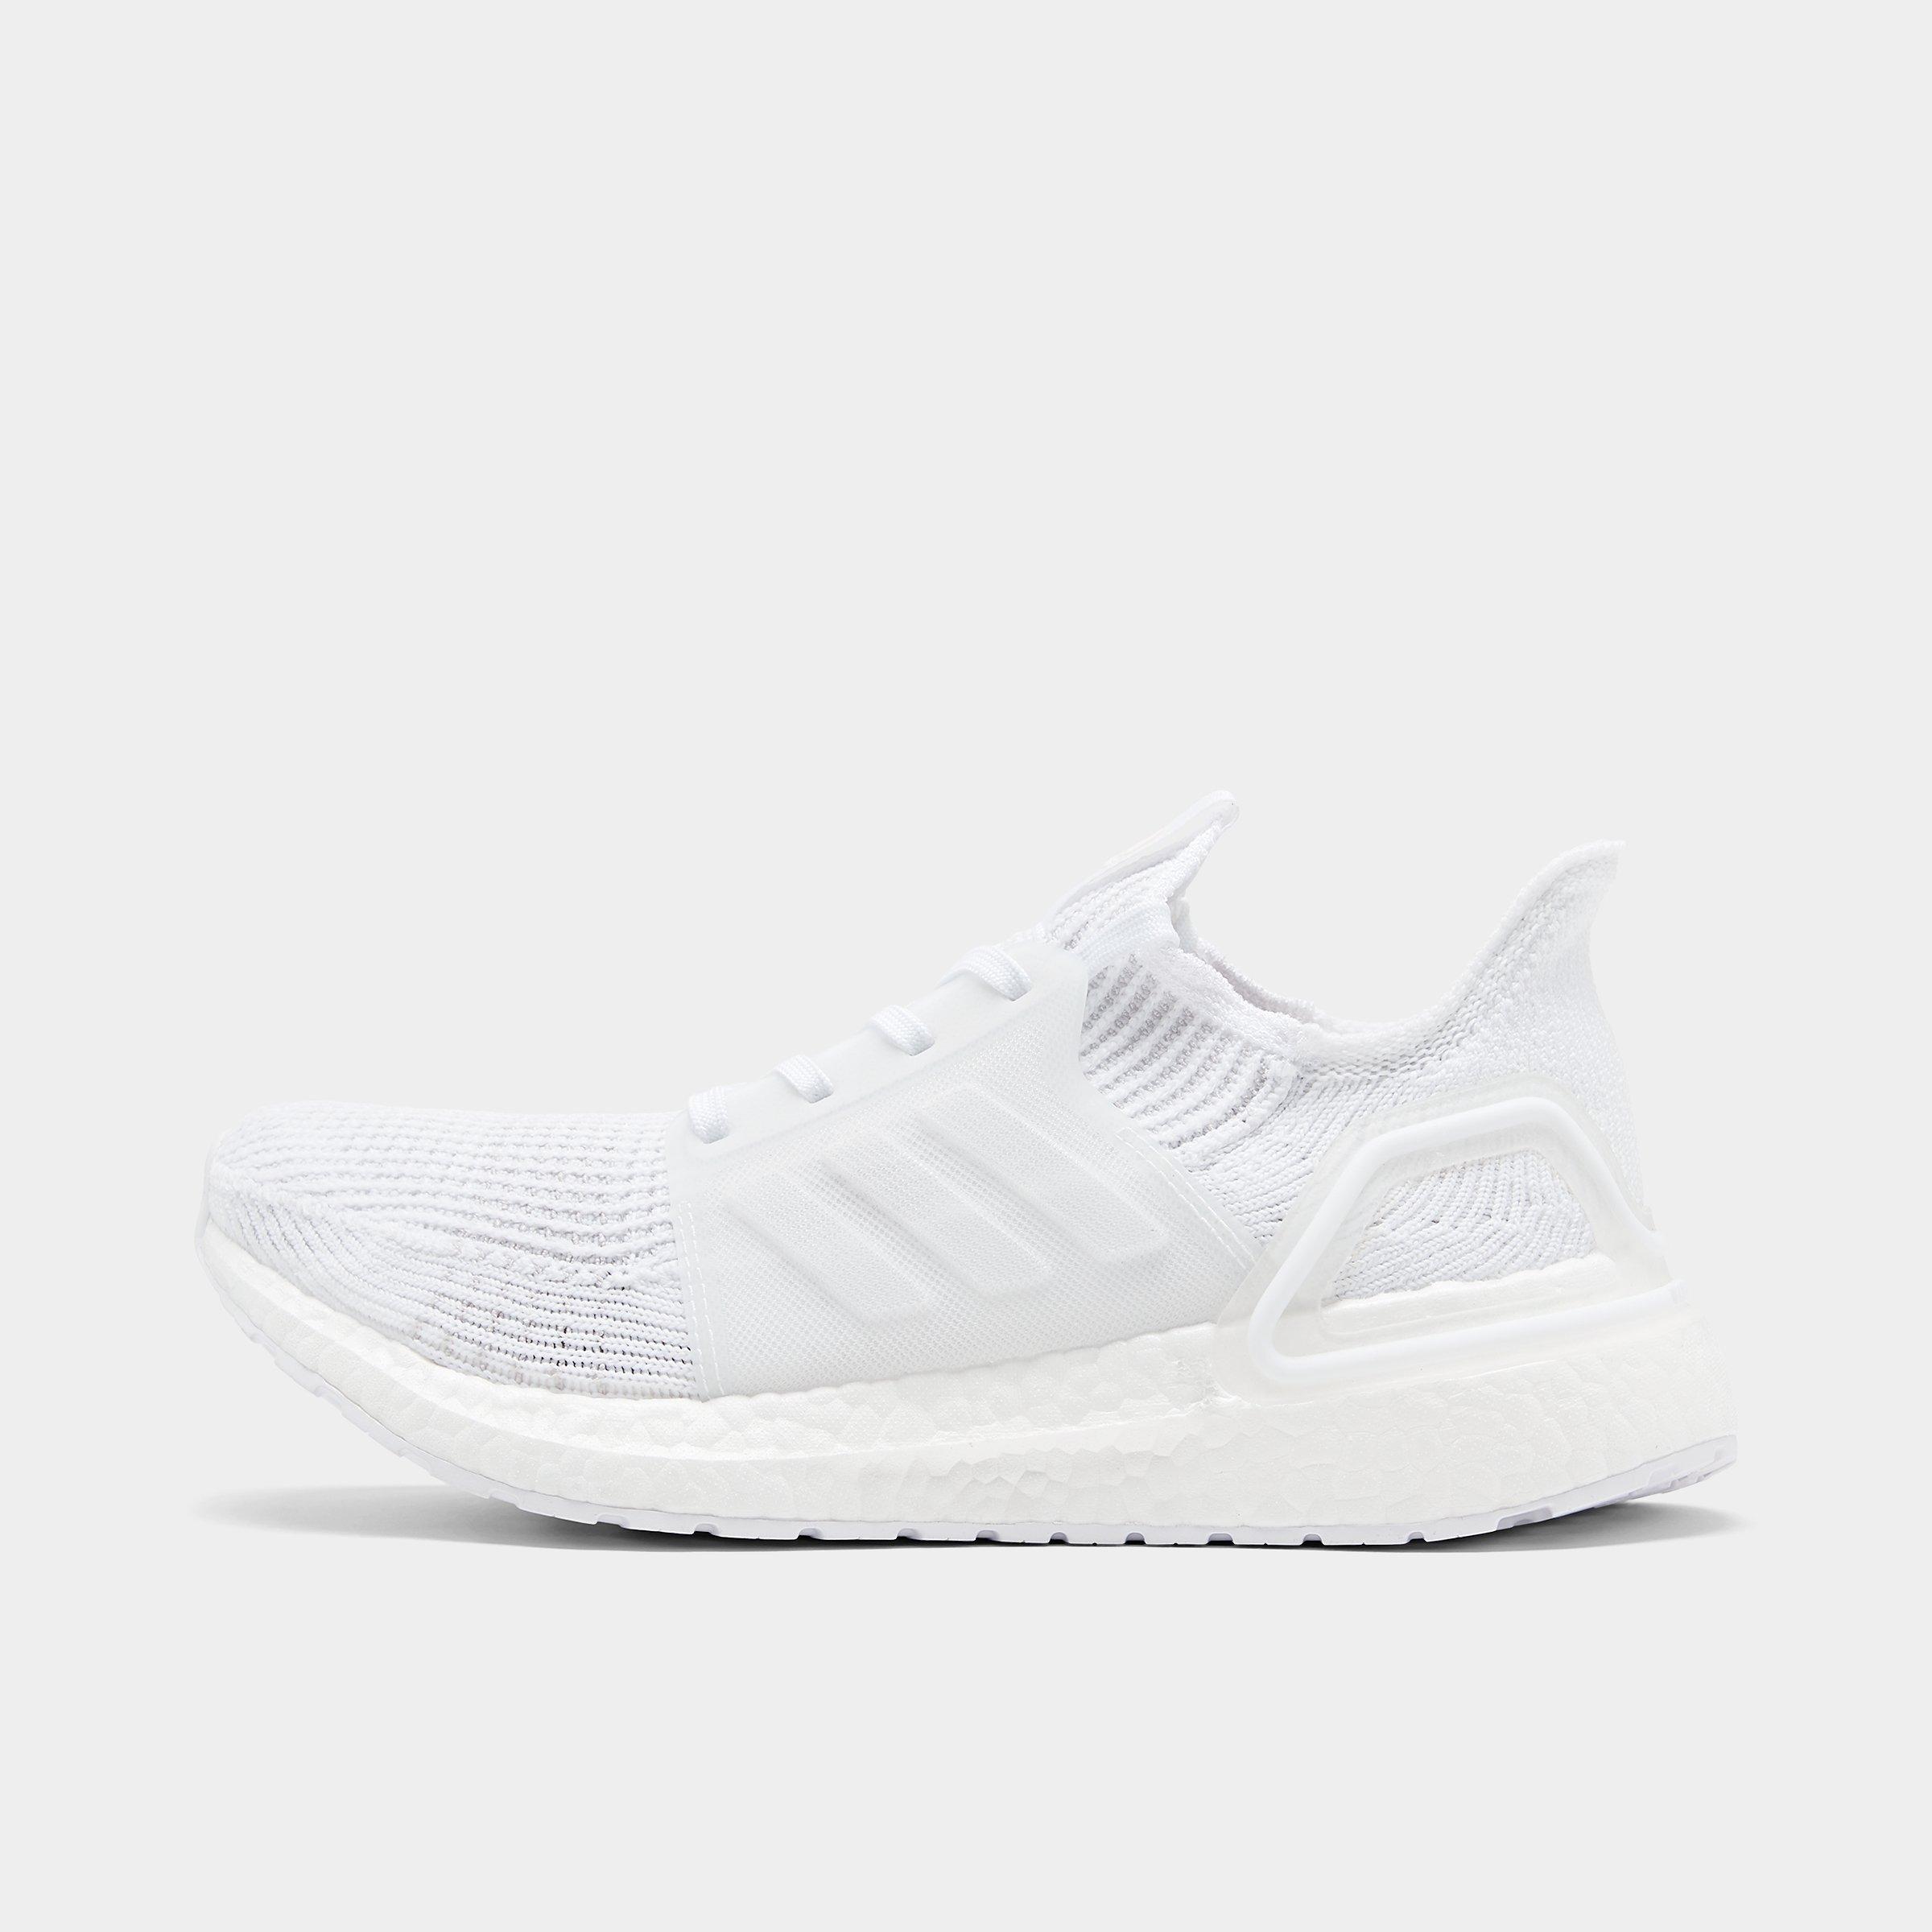 adidas women's ultraboost 19 running sneakers from finish line